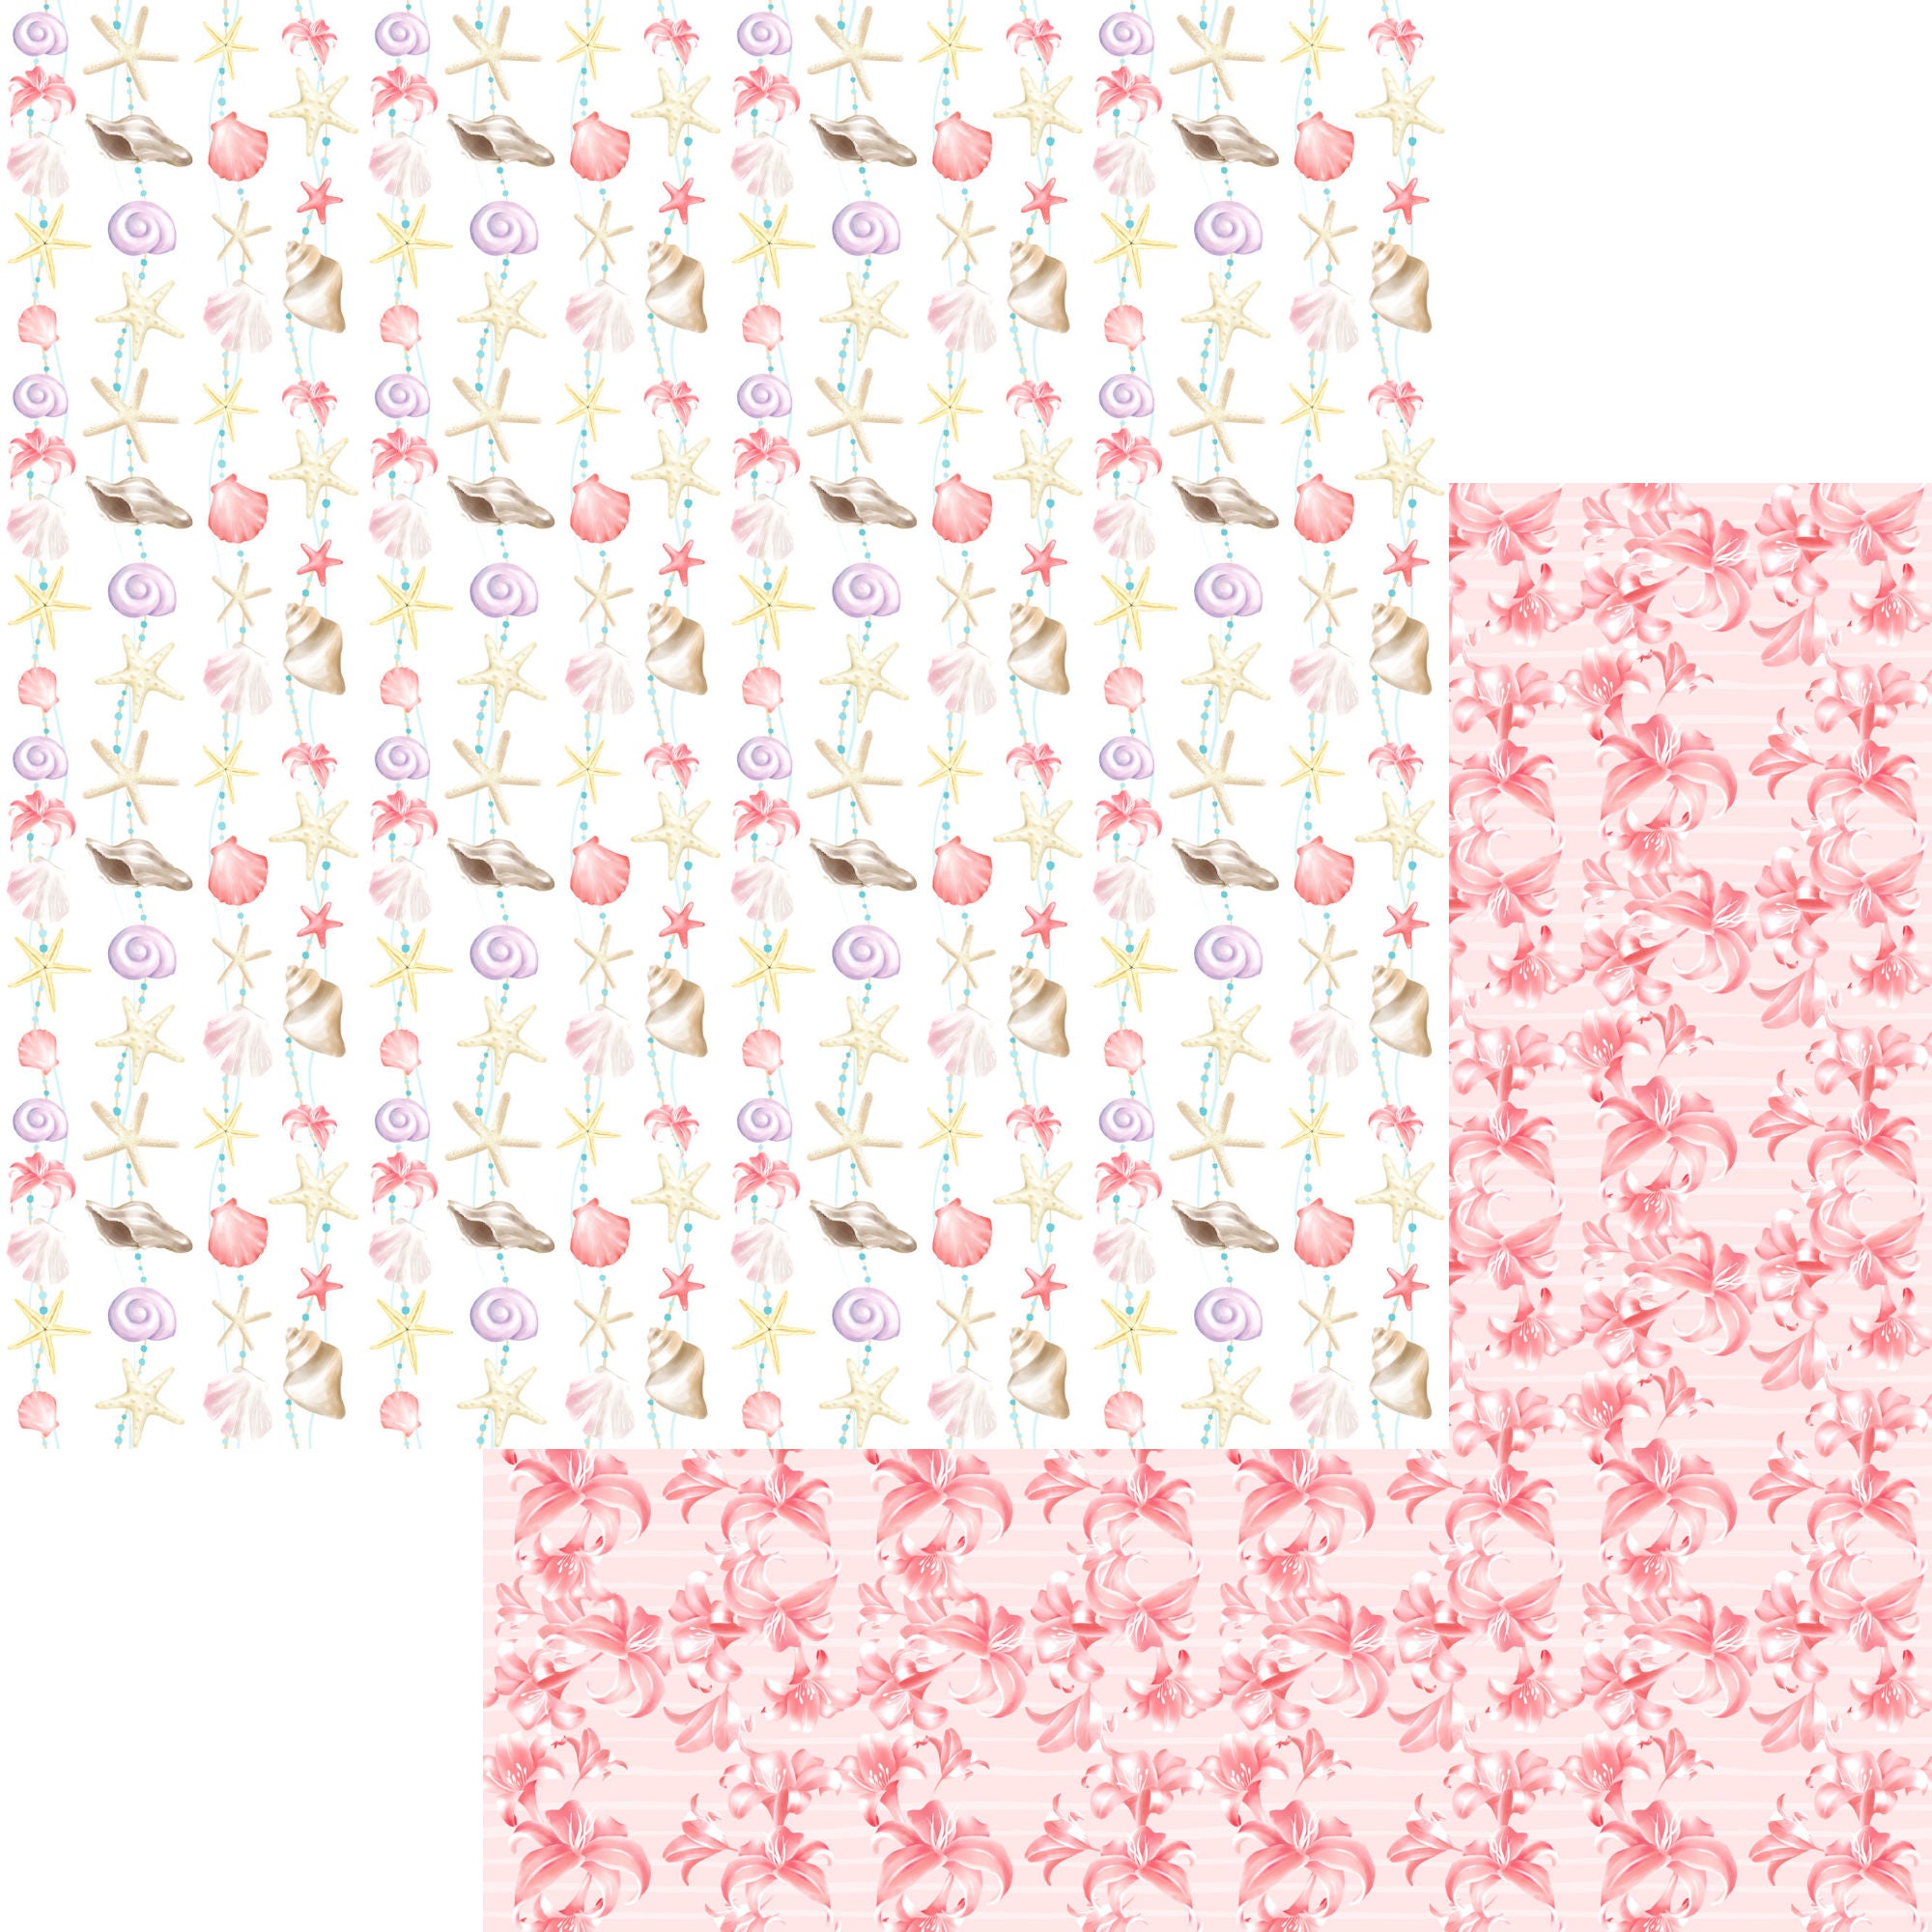 Nautical Summer Collection Floral Shells 12 x 12 Double-Sided Scrapbook Paper by SSC Designs